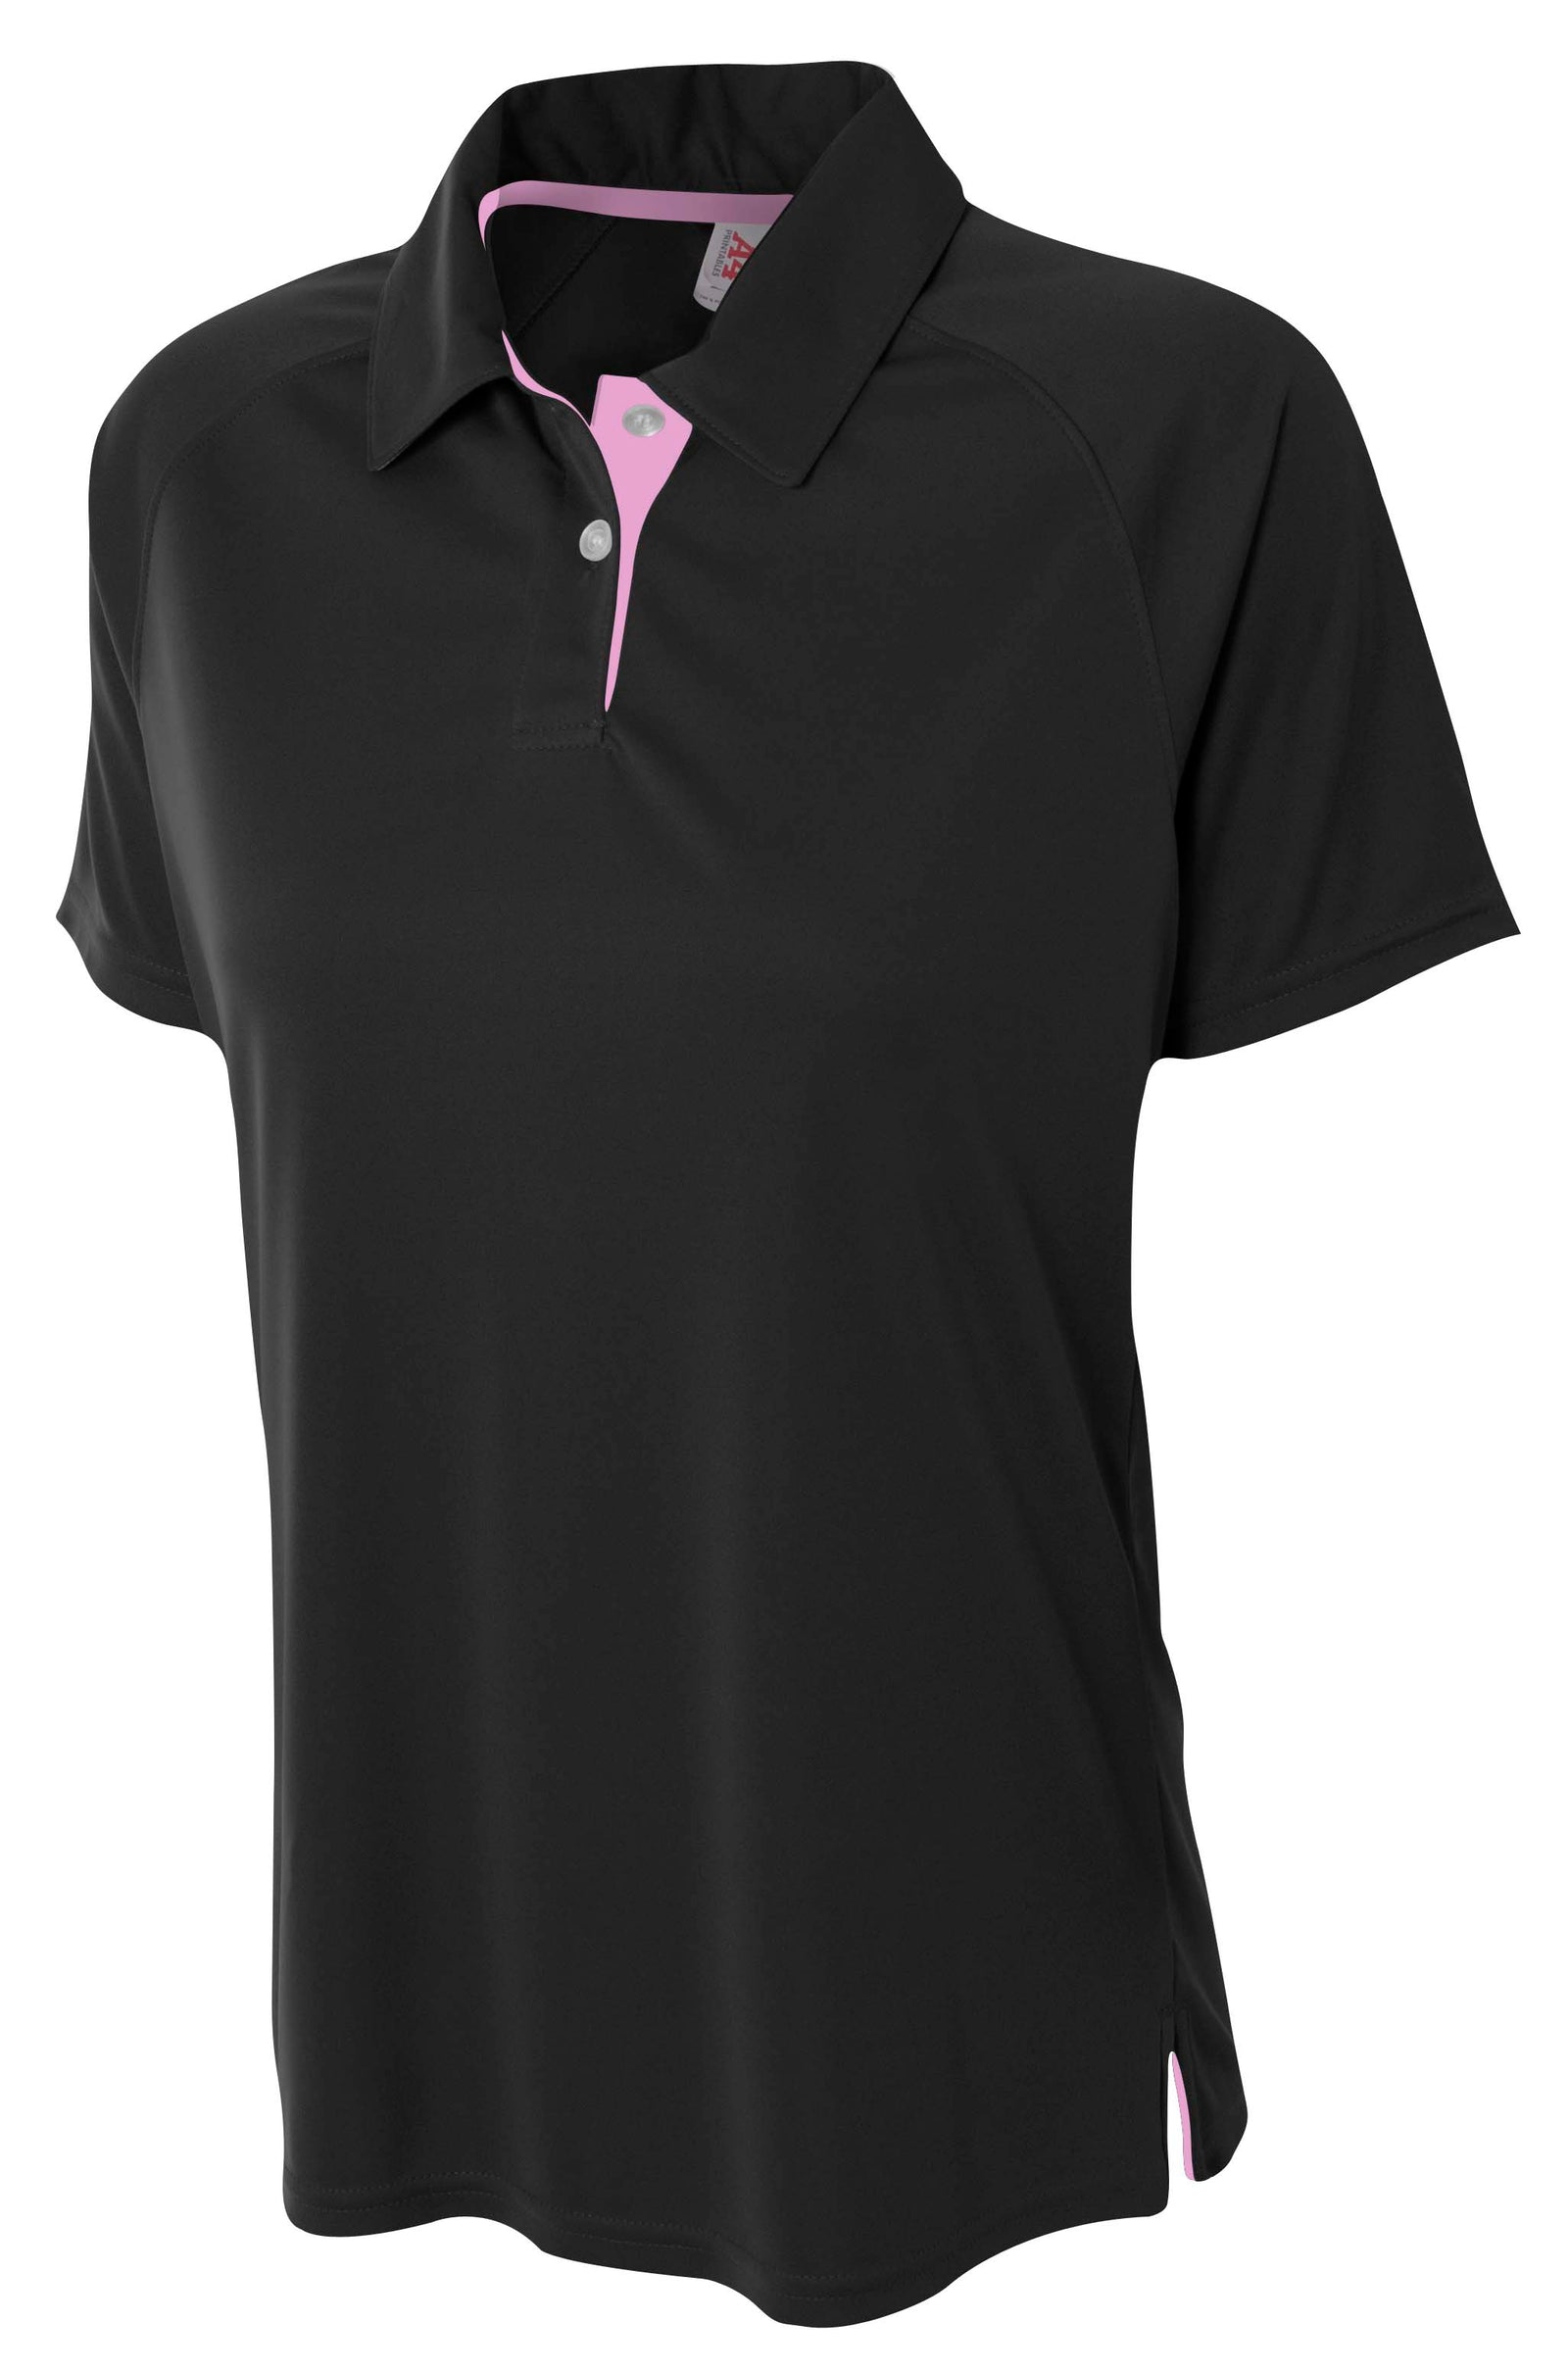 Black/pink A4 Contrast Polo